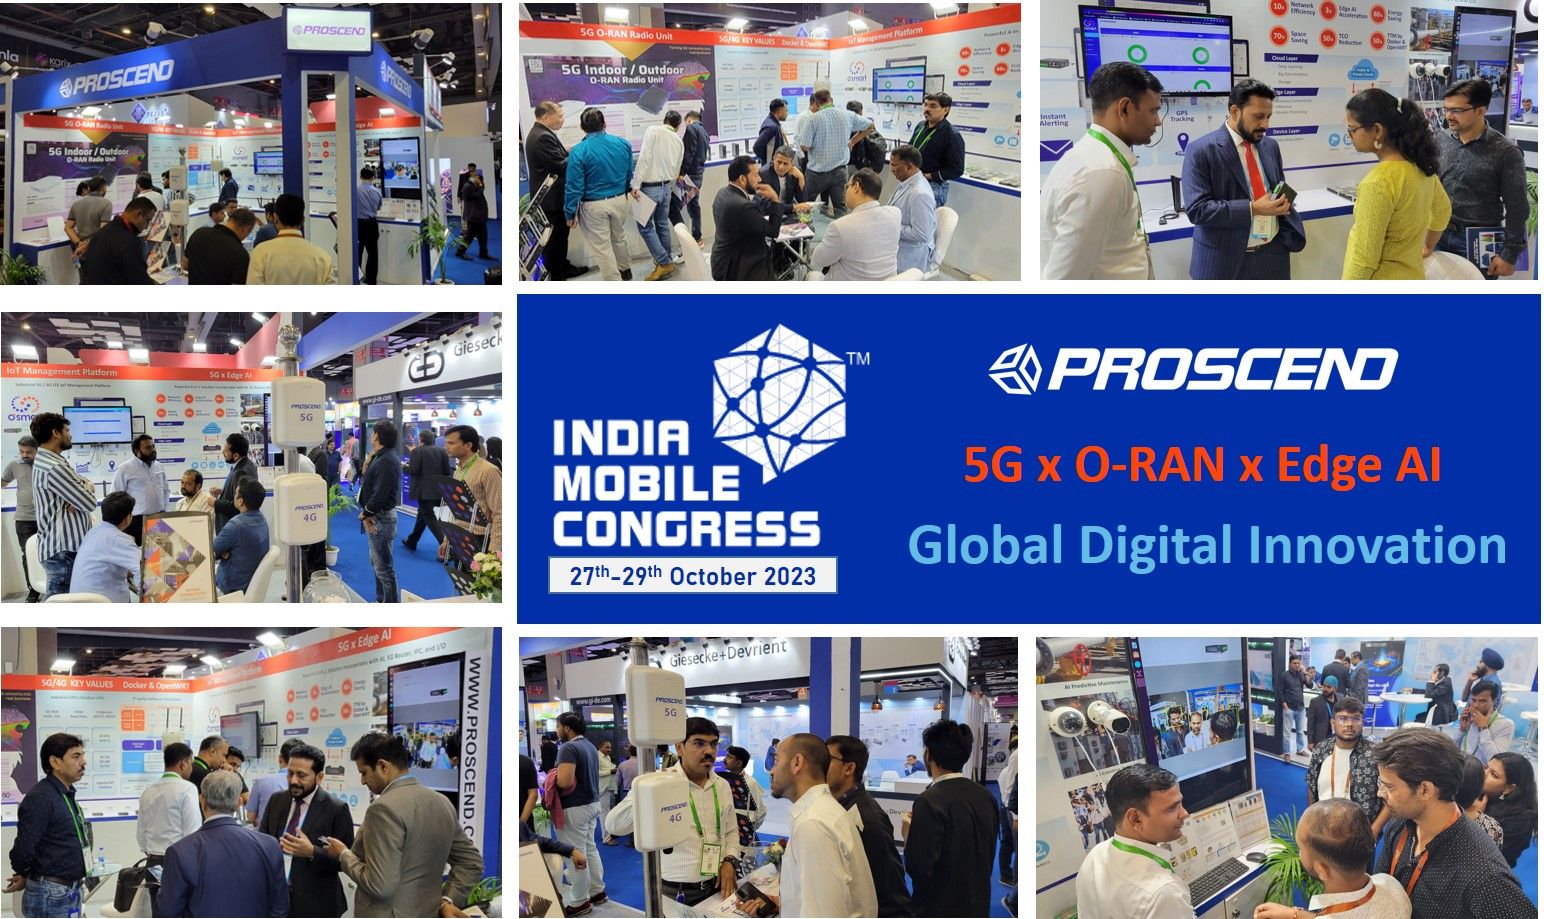 Proscend had a notable presence at IMC 2023, attracting over 250 attendees to visit remarkable achievements.